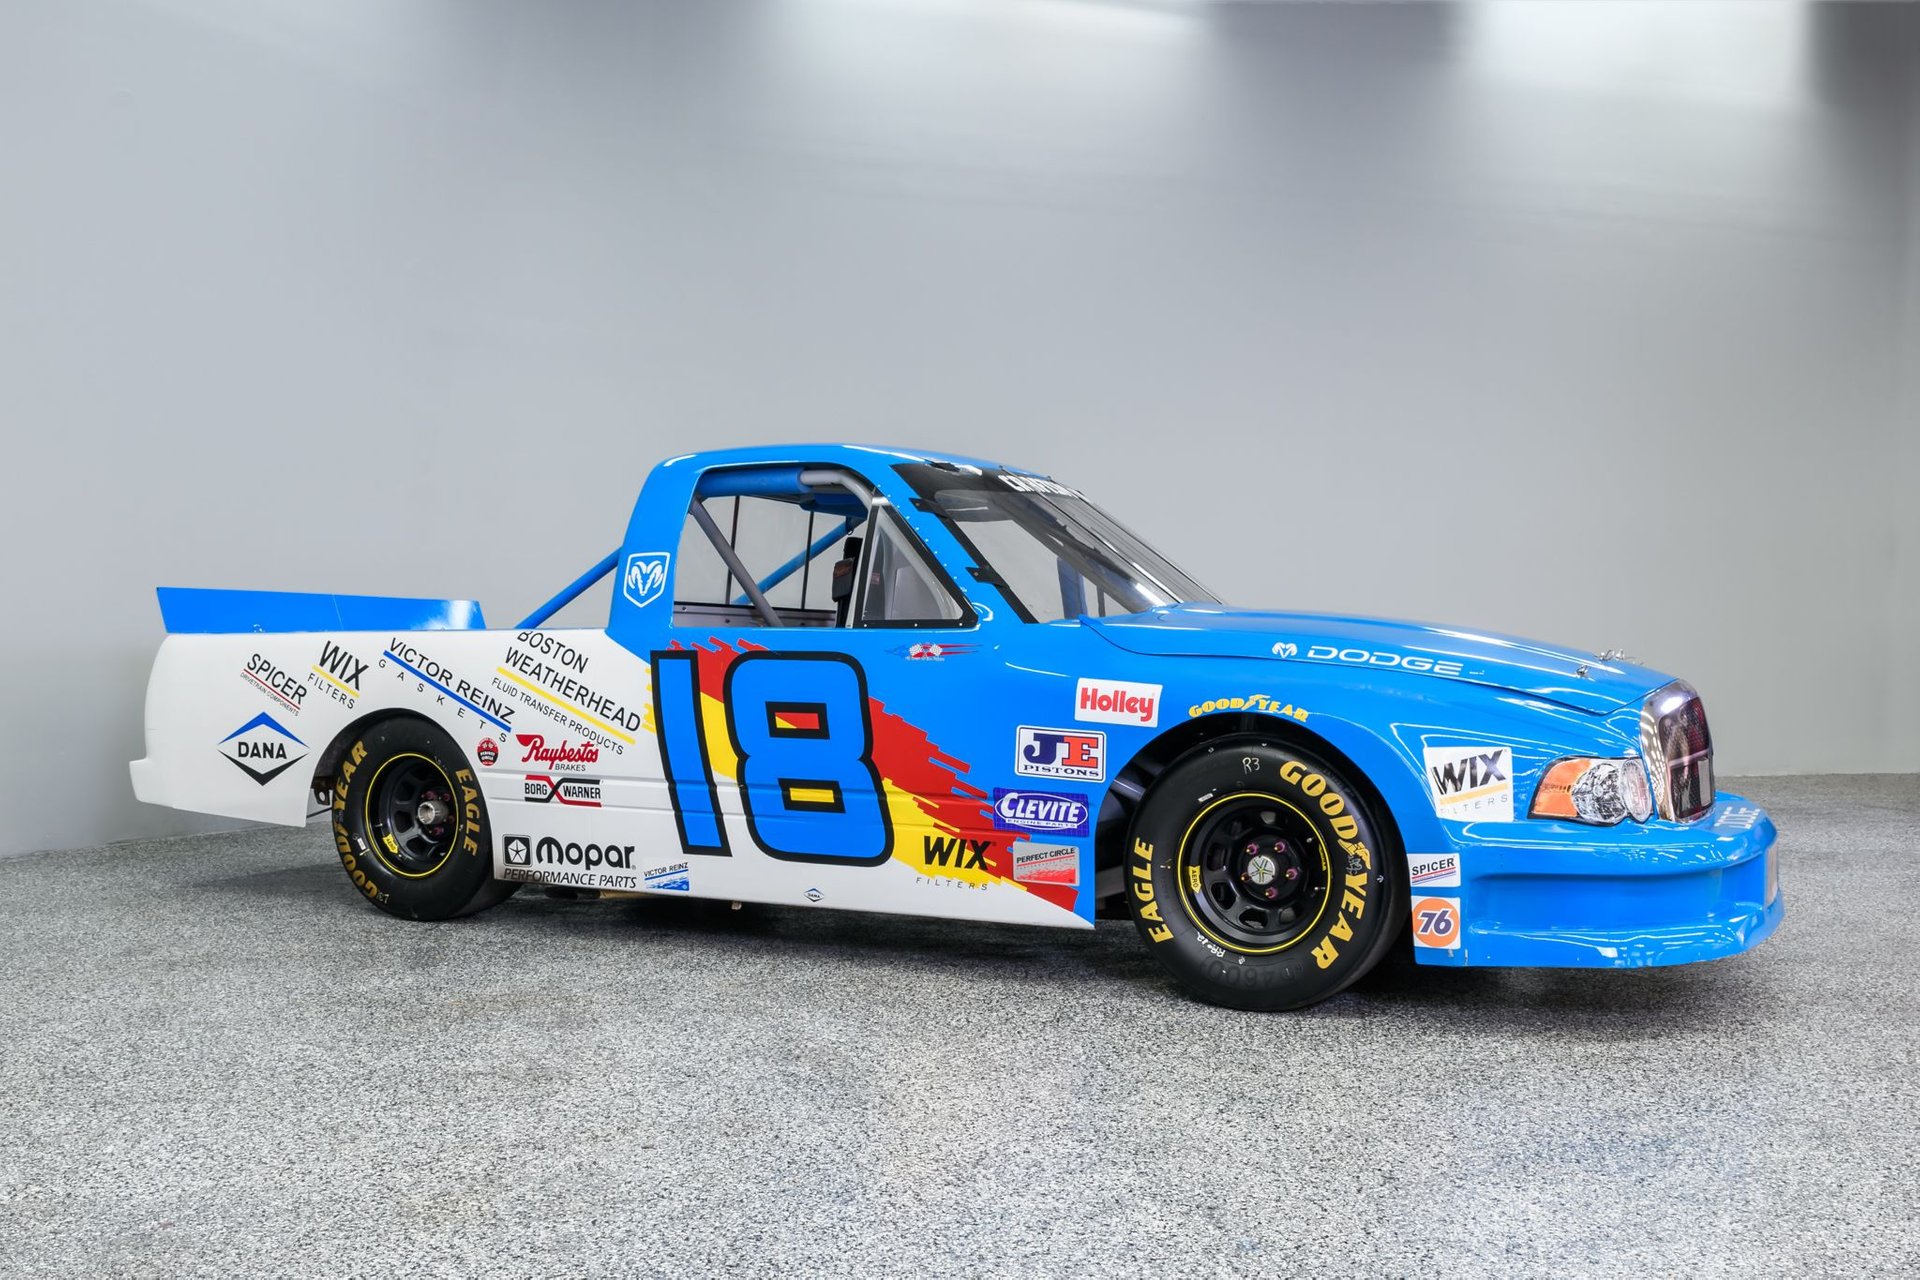 1998 Dodge Dana Brings Affordable Nascar Truck Racing Vibes To Ones